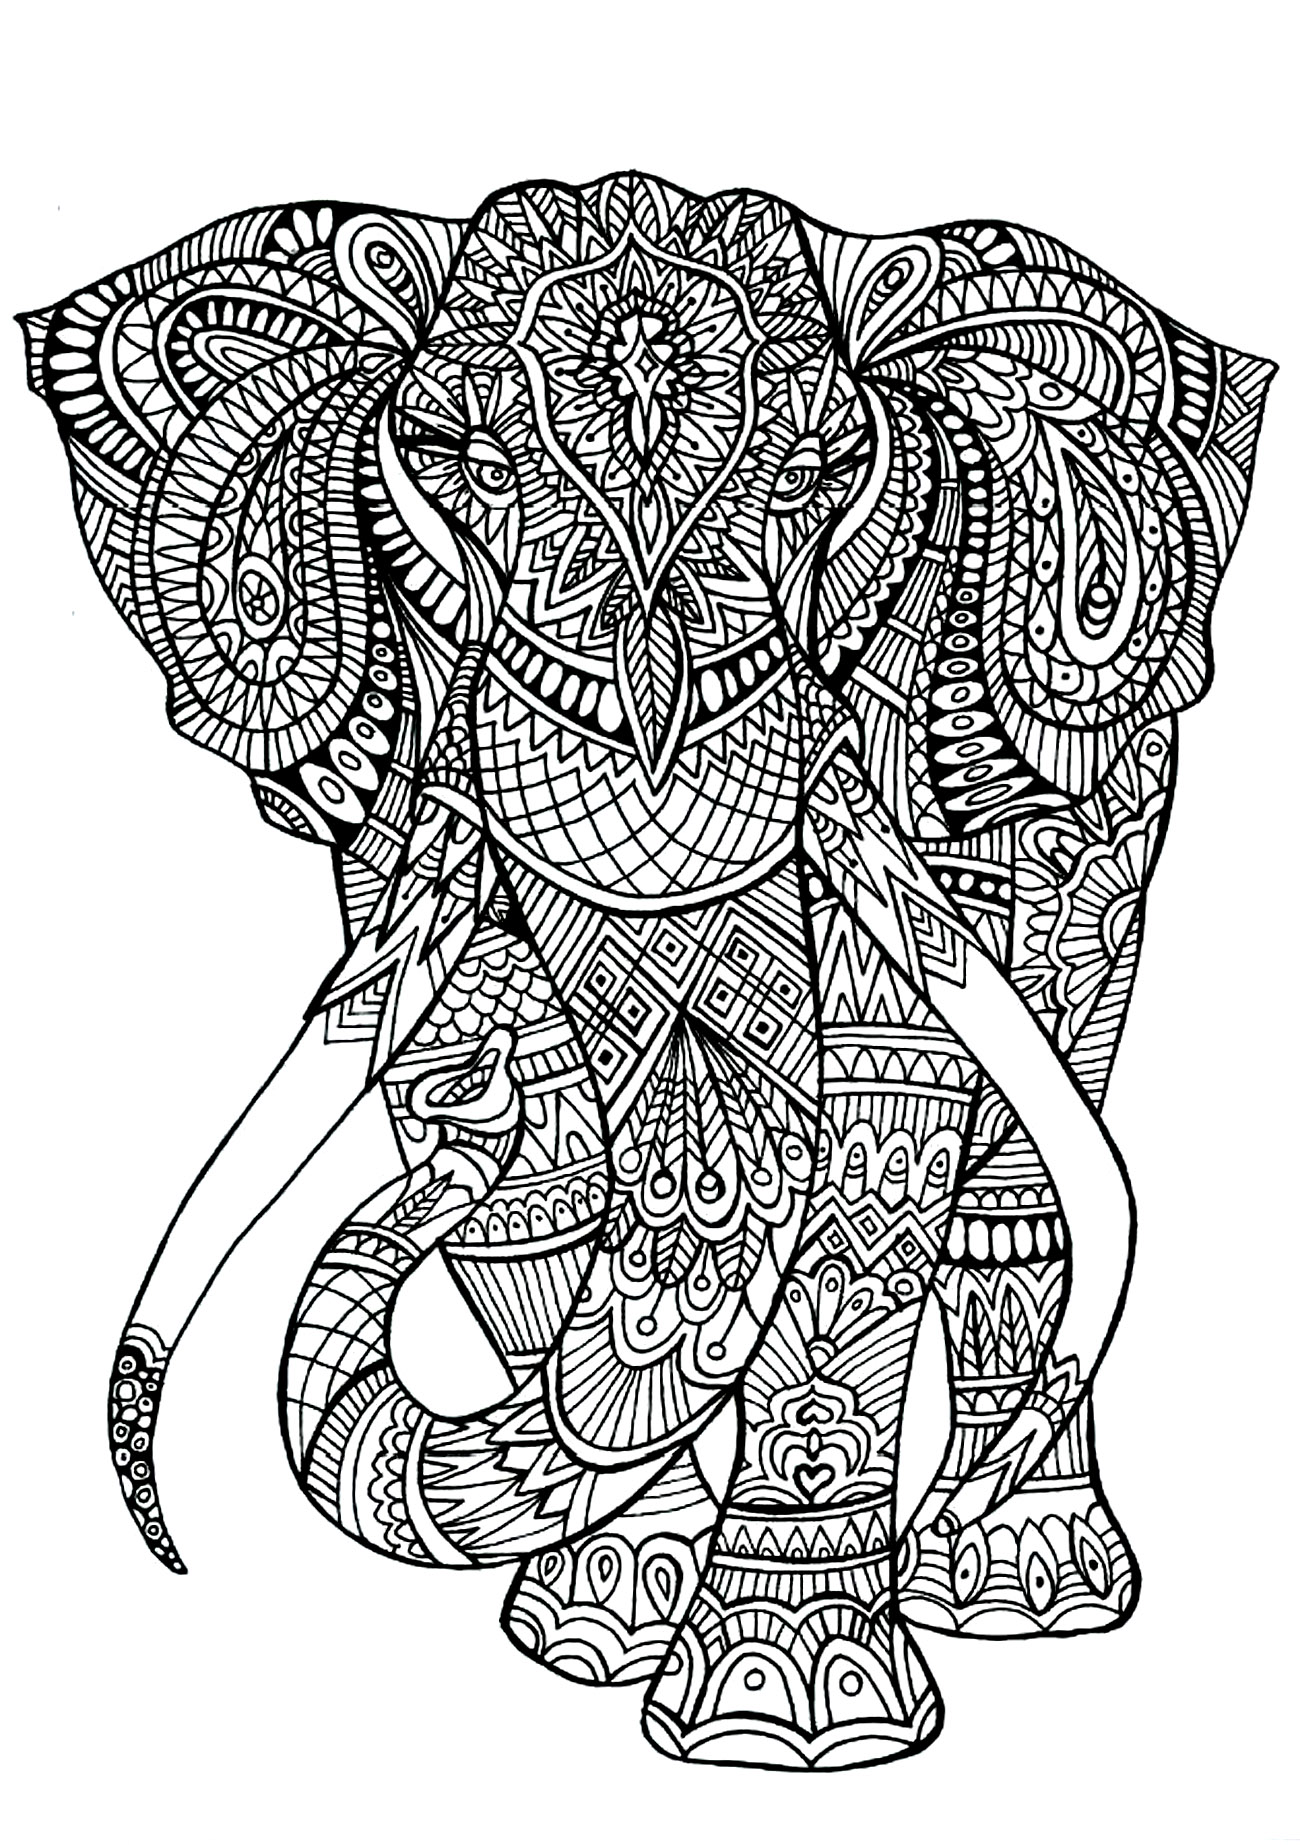 Elephant patterns | Animals - Coloring pages for adults | JustColor